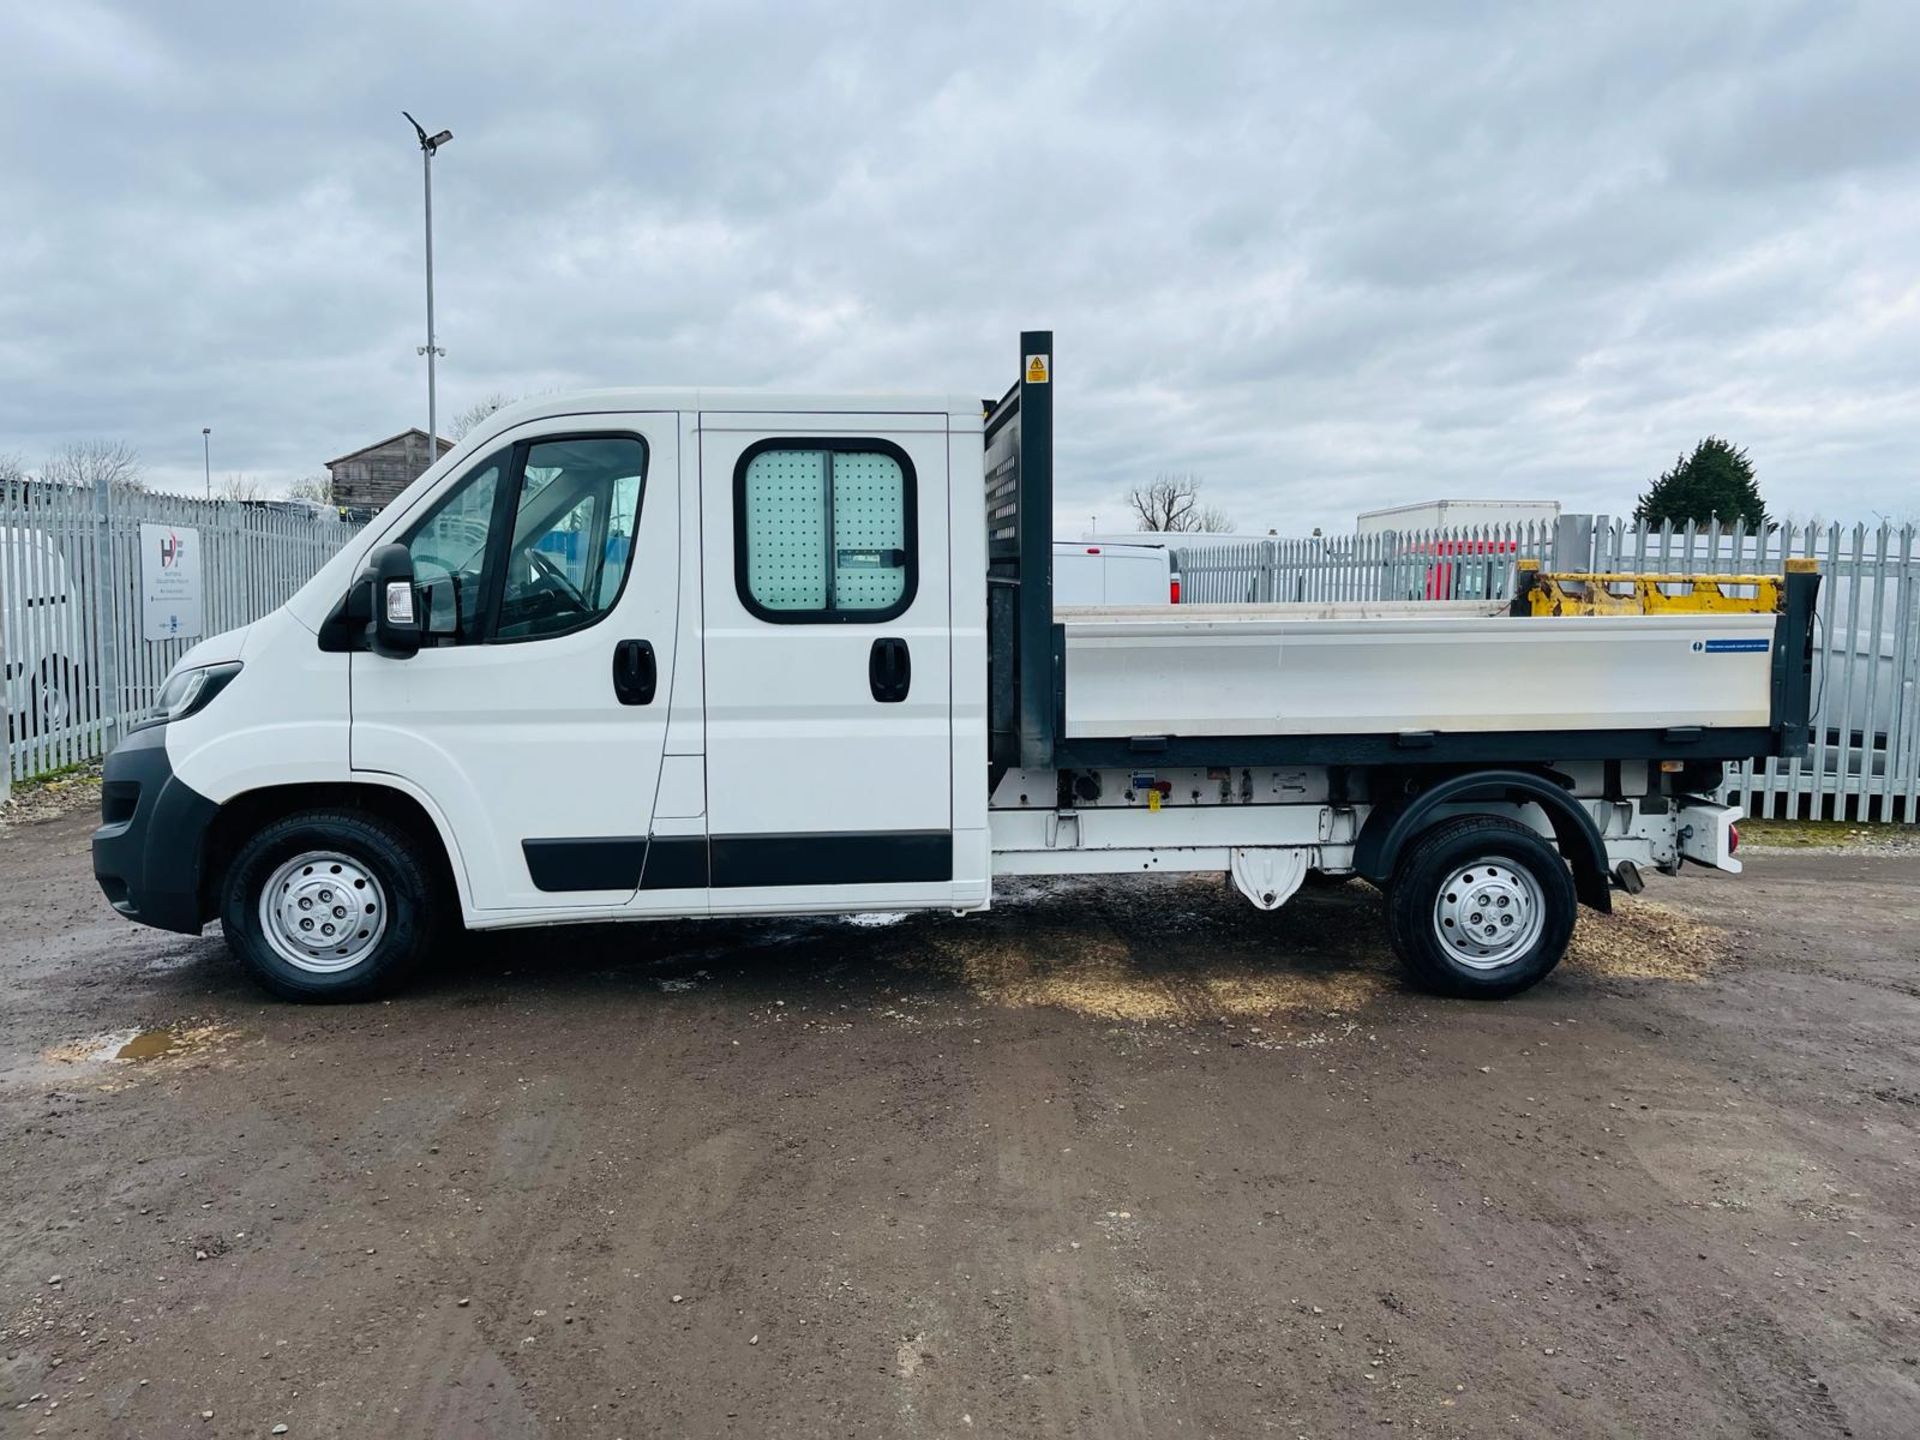 ** ON SALE ** Peugeot Boxer 335 2.2 Hdi 130 L3 CrewCab Tipper 2015 '15 Reg' ONLY 56,897 mile - Image 4 of 31